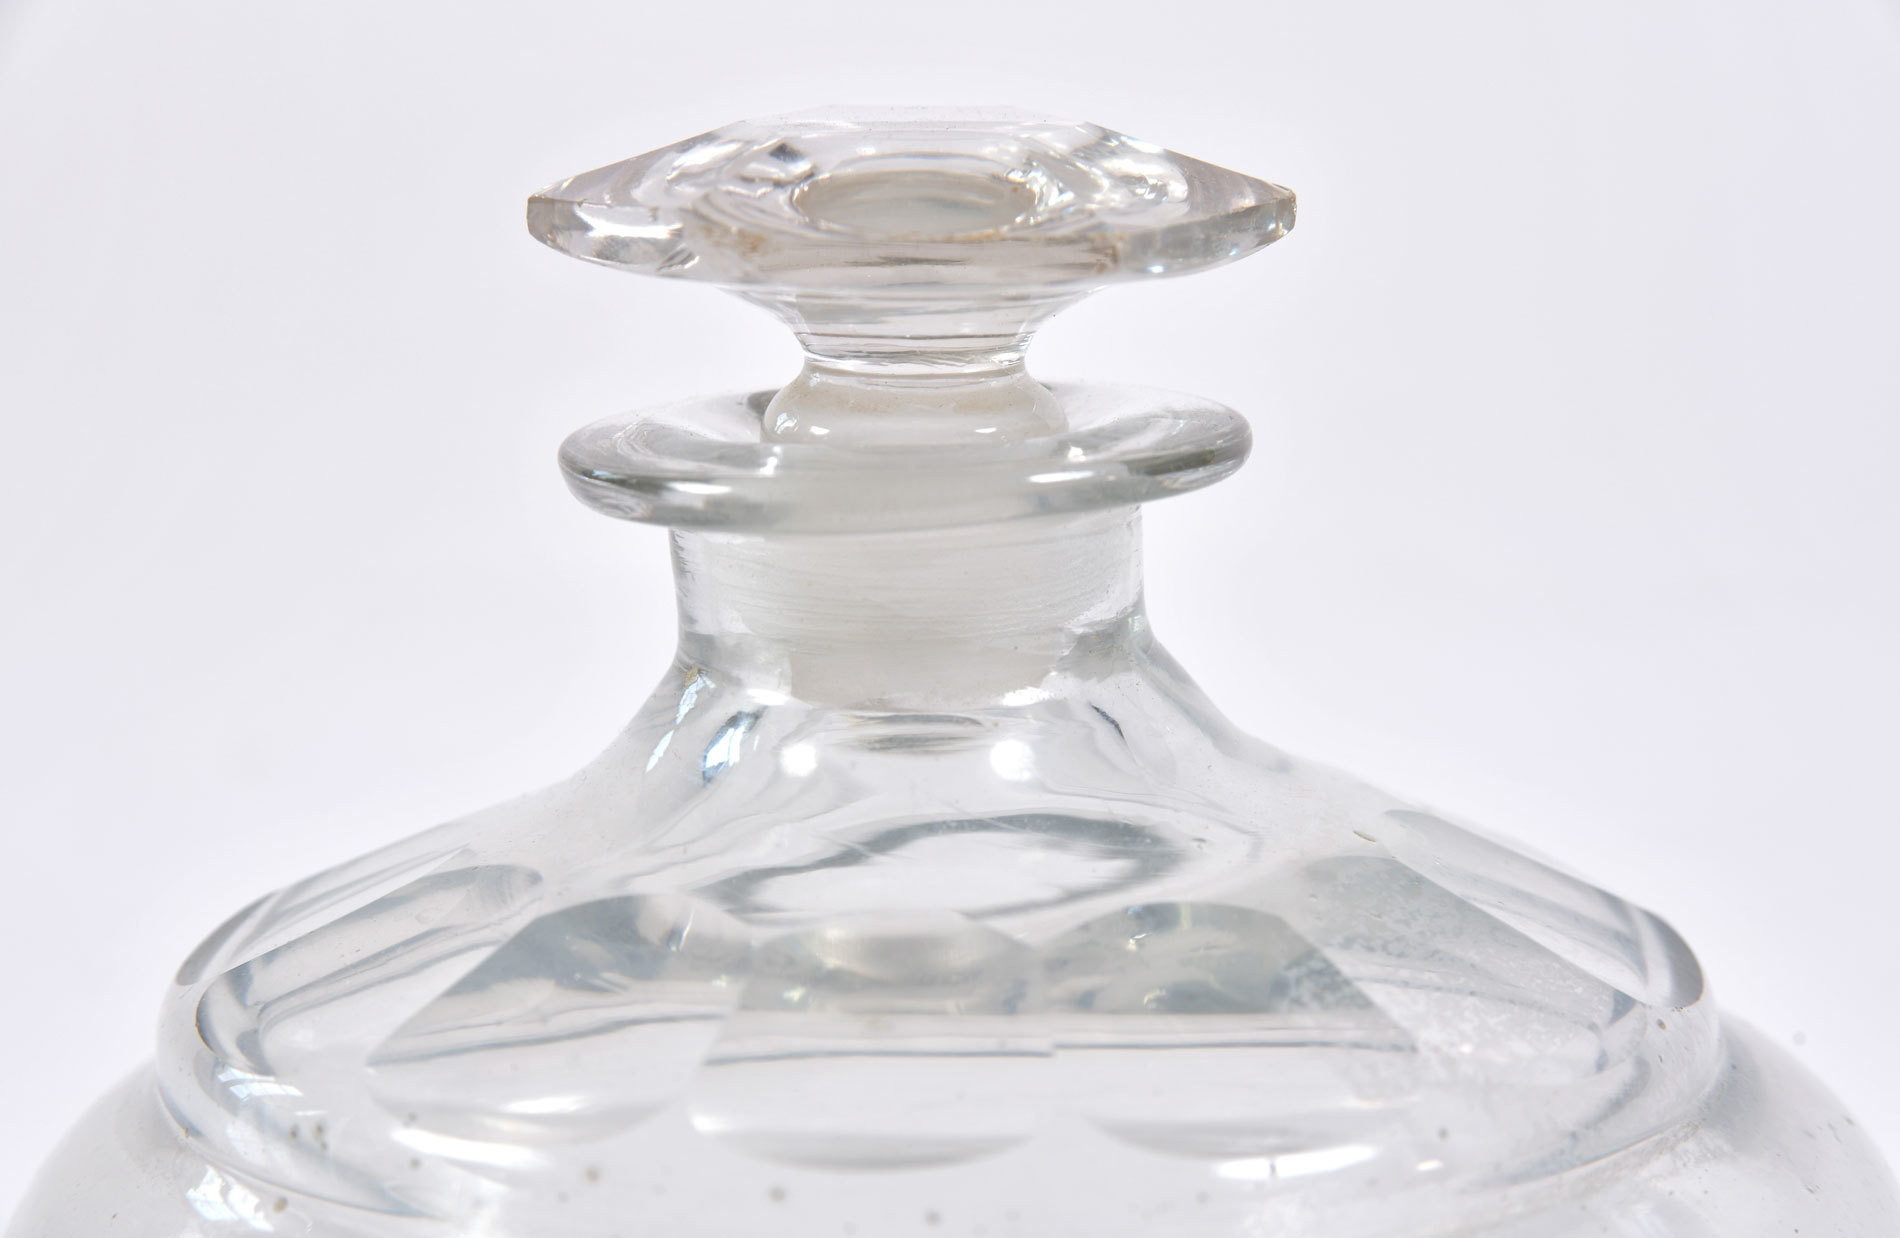 The image for Perfume Bottle 03